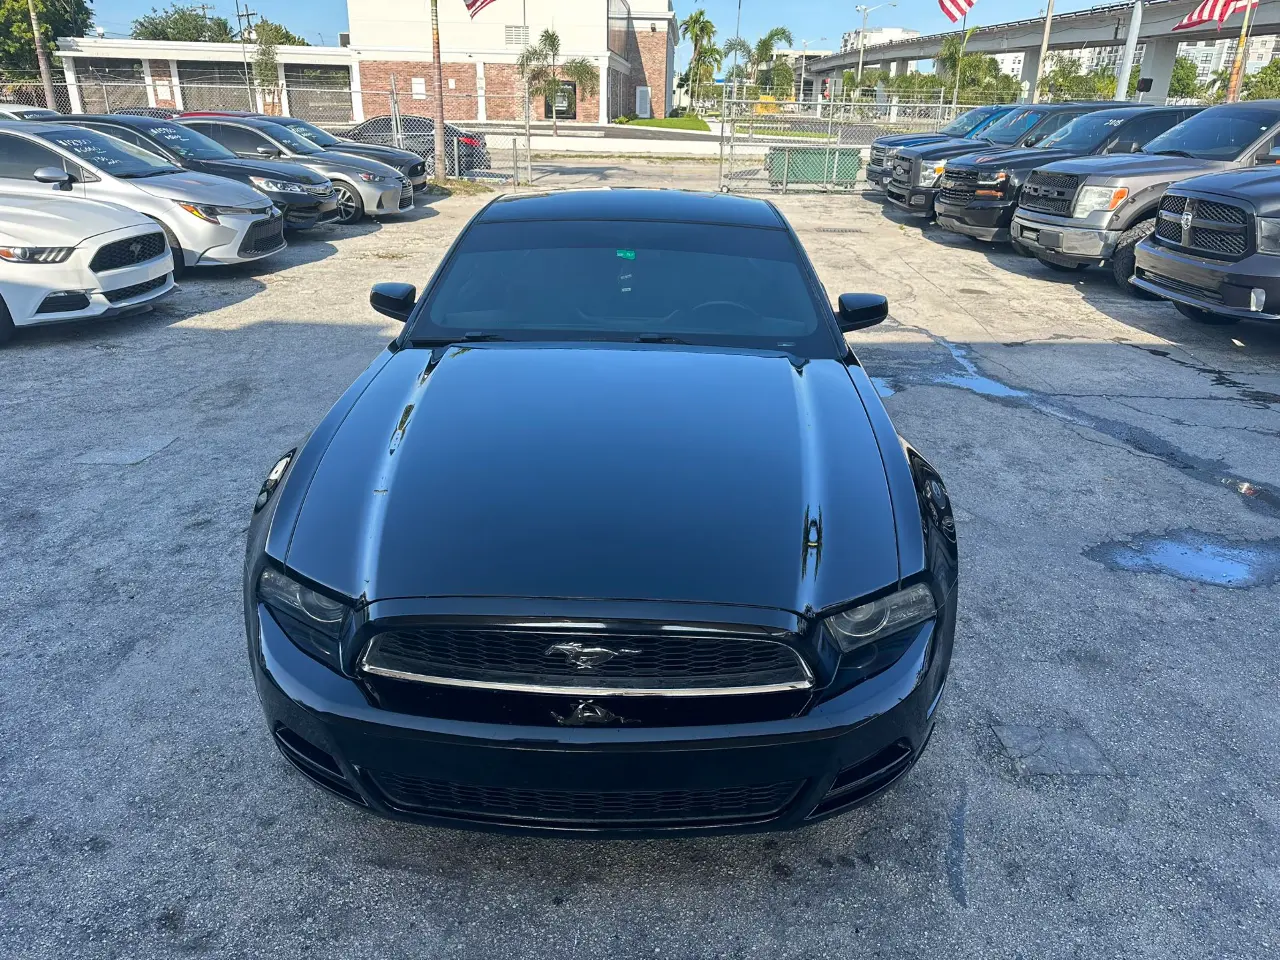 used 2014 Ford Mustang - front view 2